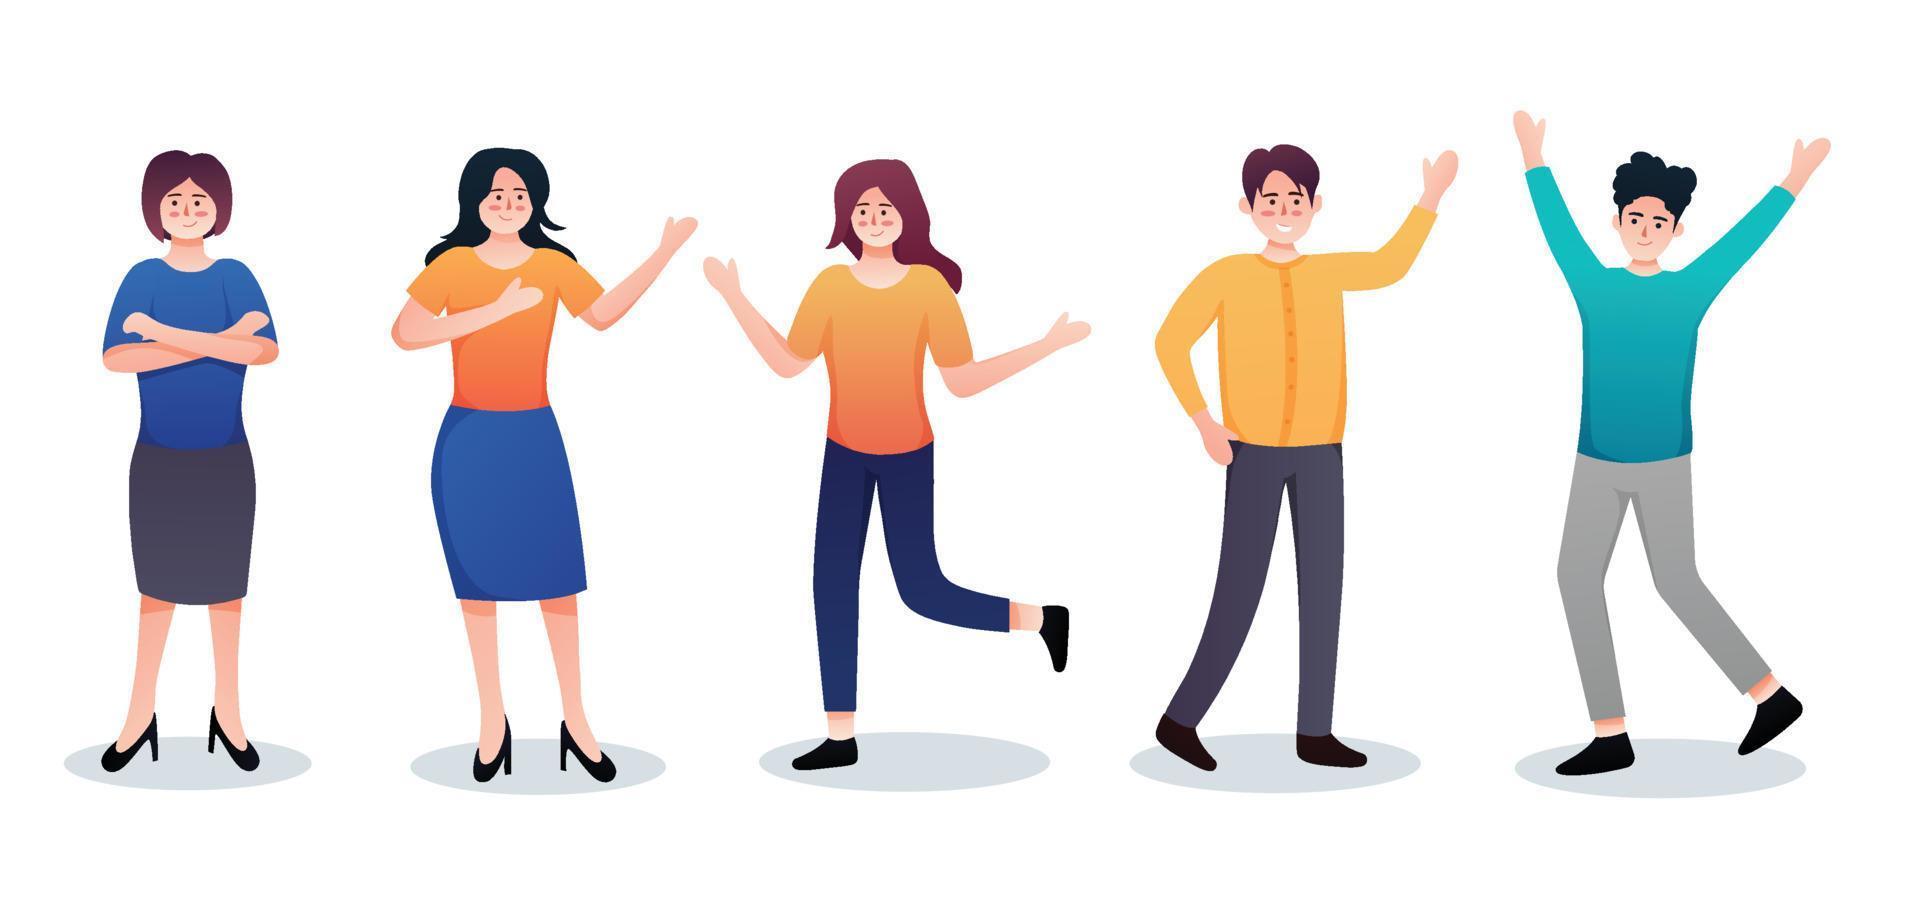 set of character people various movements vector illustration